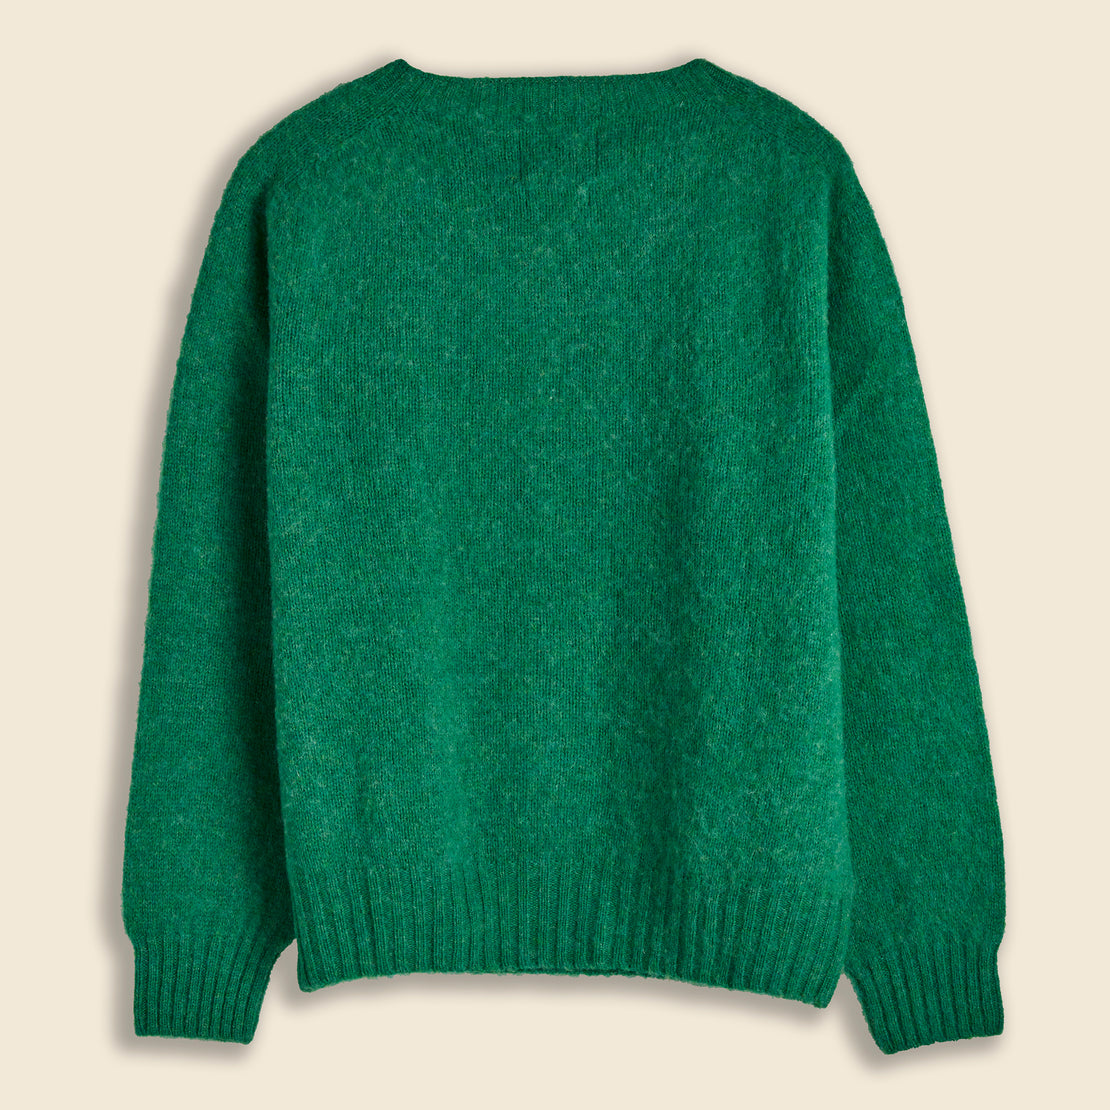 ForeverNeverMore Sweater - Green Dream - Howlin - STAG Provisions - W - Tops - Sweater